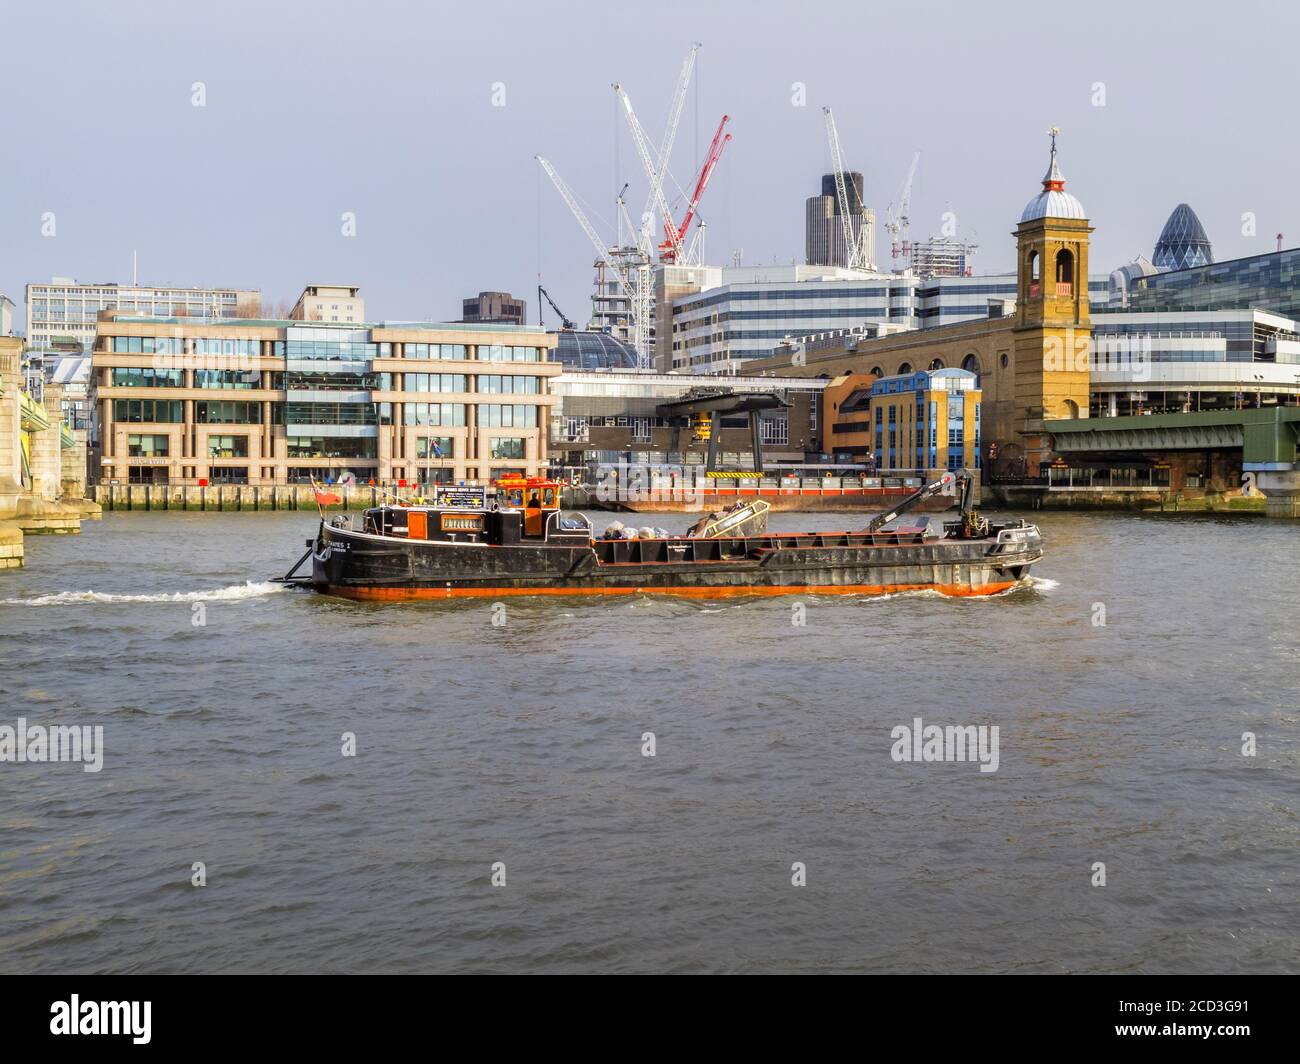 The refuse collection barge 'Tidy Thames 1' sails near the railway bridge over the River Thames at Cannon Street Station, City of London Stock Photo